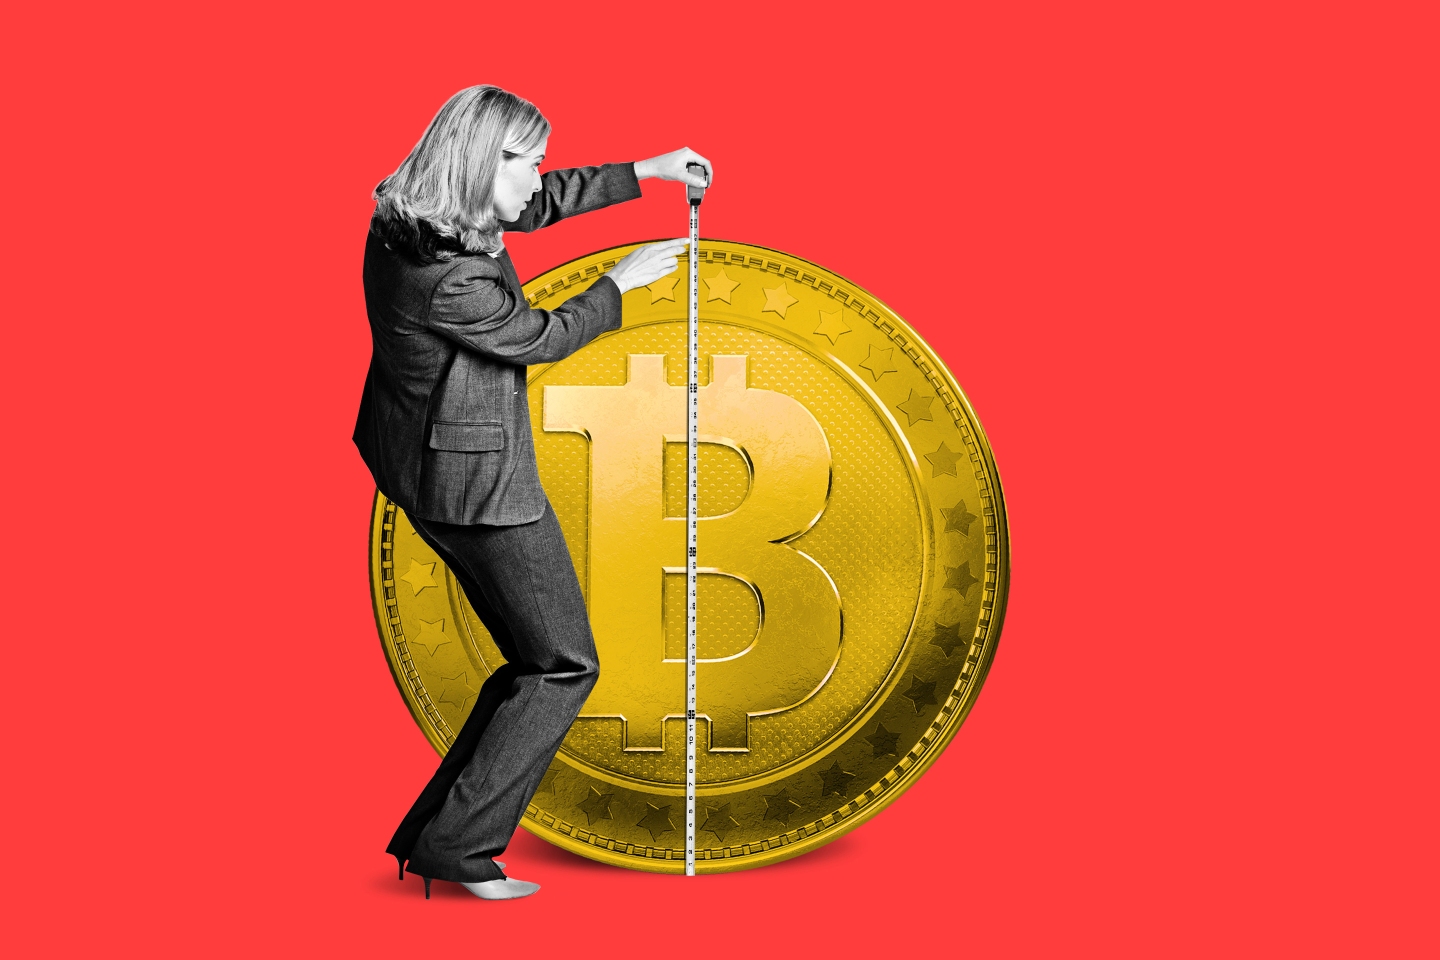 A woman measures a Bitcoin with a tape measure.